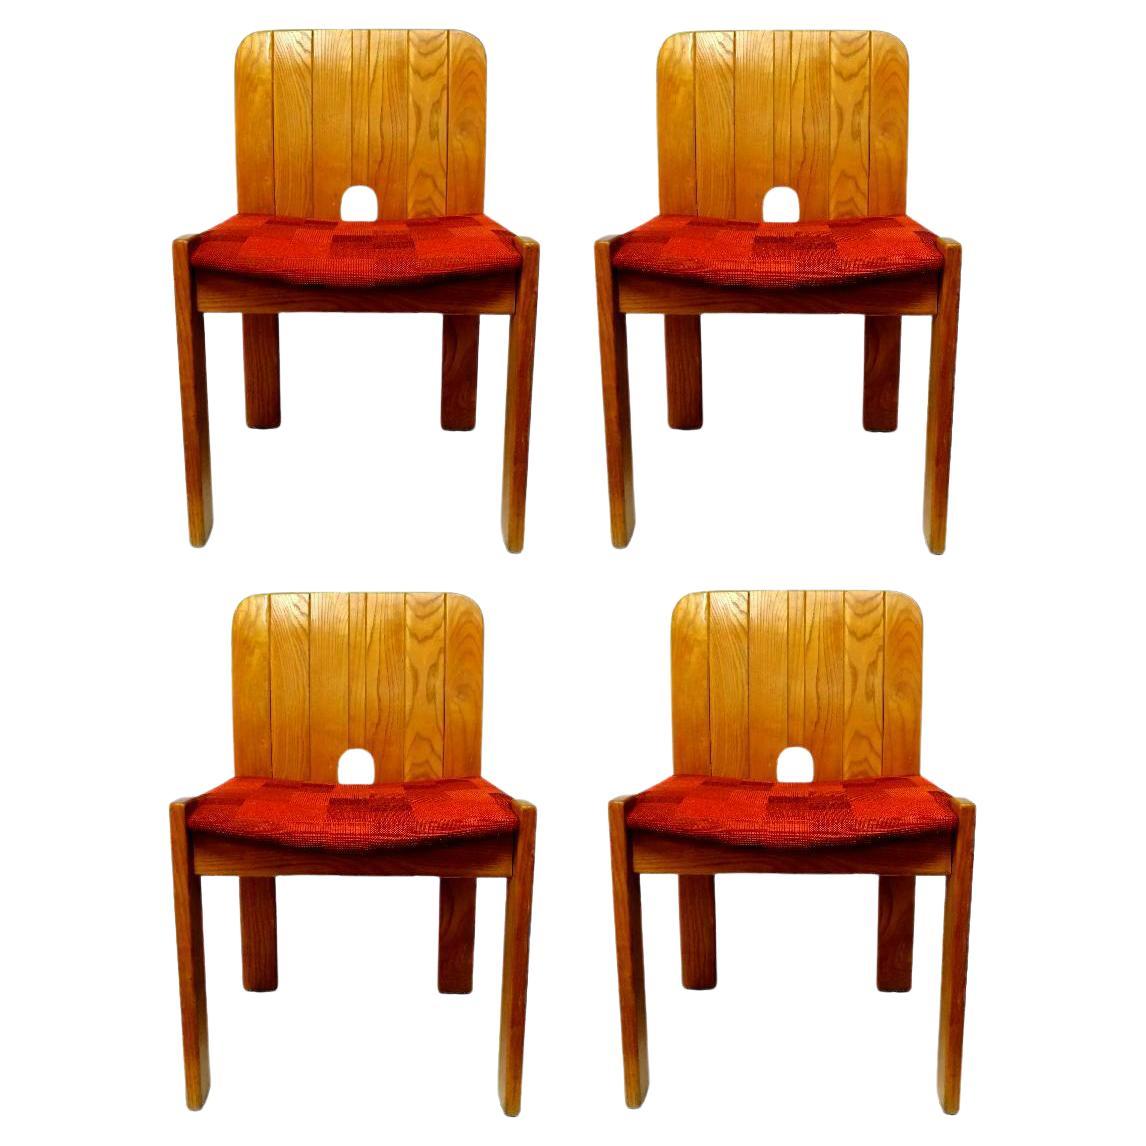 Lot of Four Wood Chairs in the Style of Zanotta, 1970s